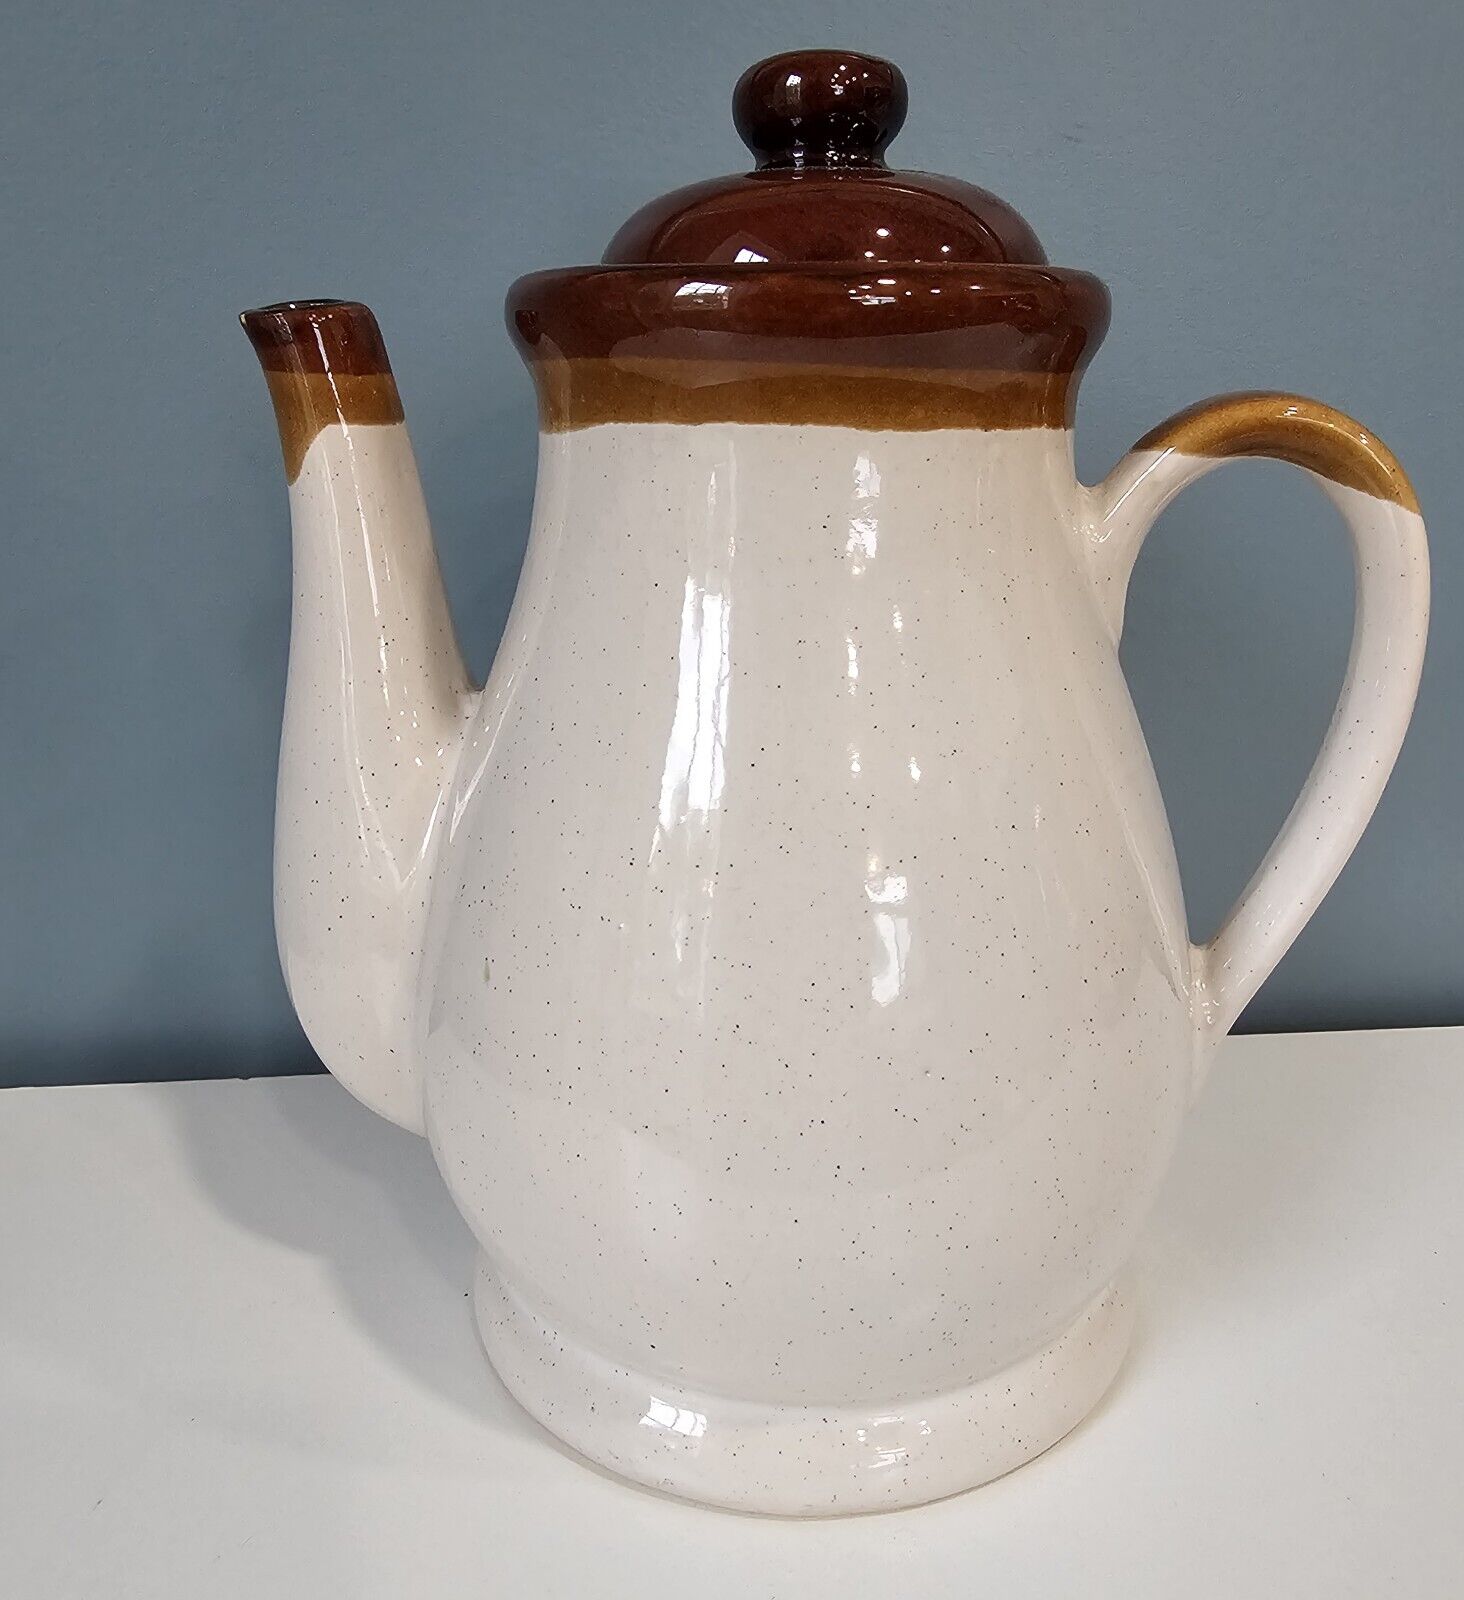 Vintage Teapot Brown And Tan Made In Taiwan Large